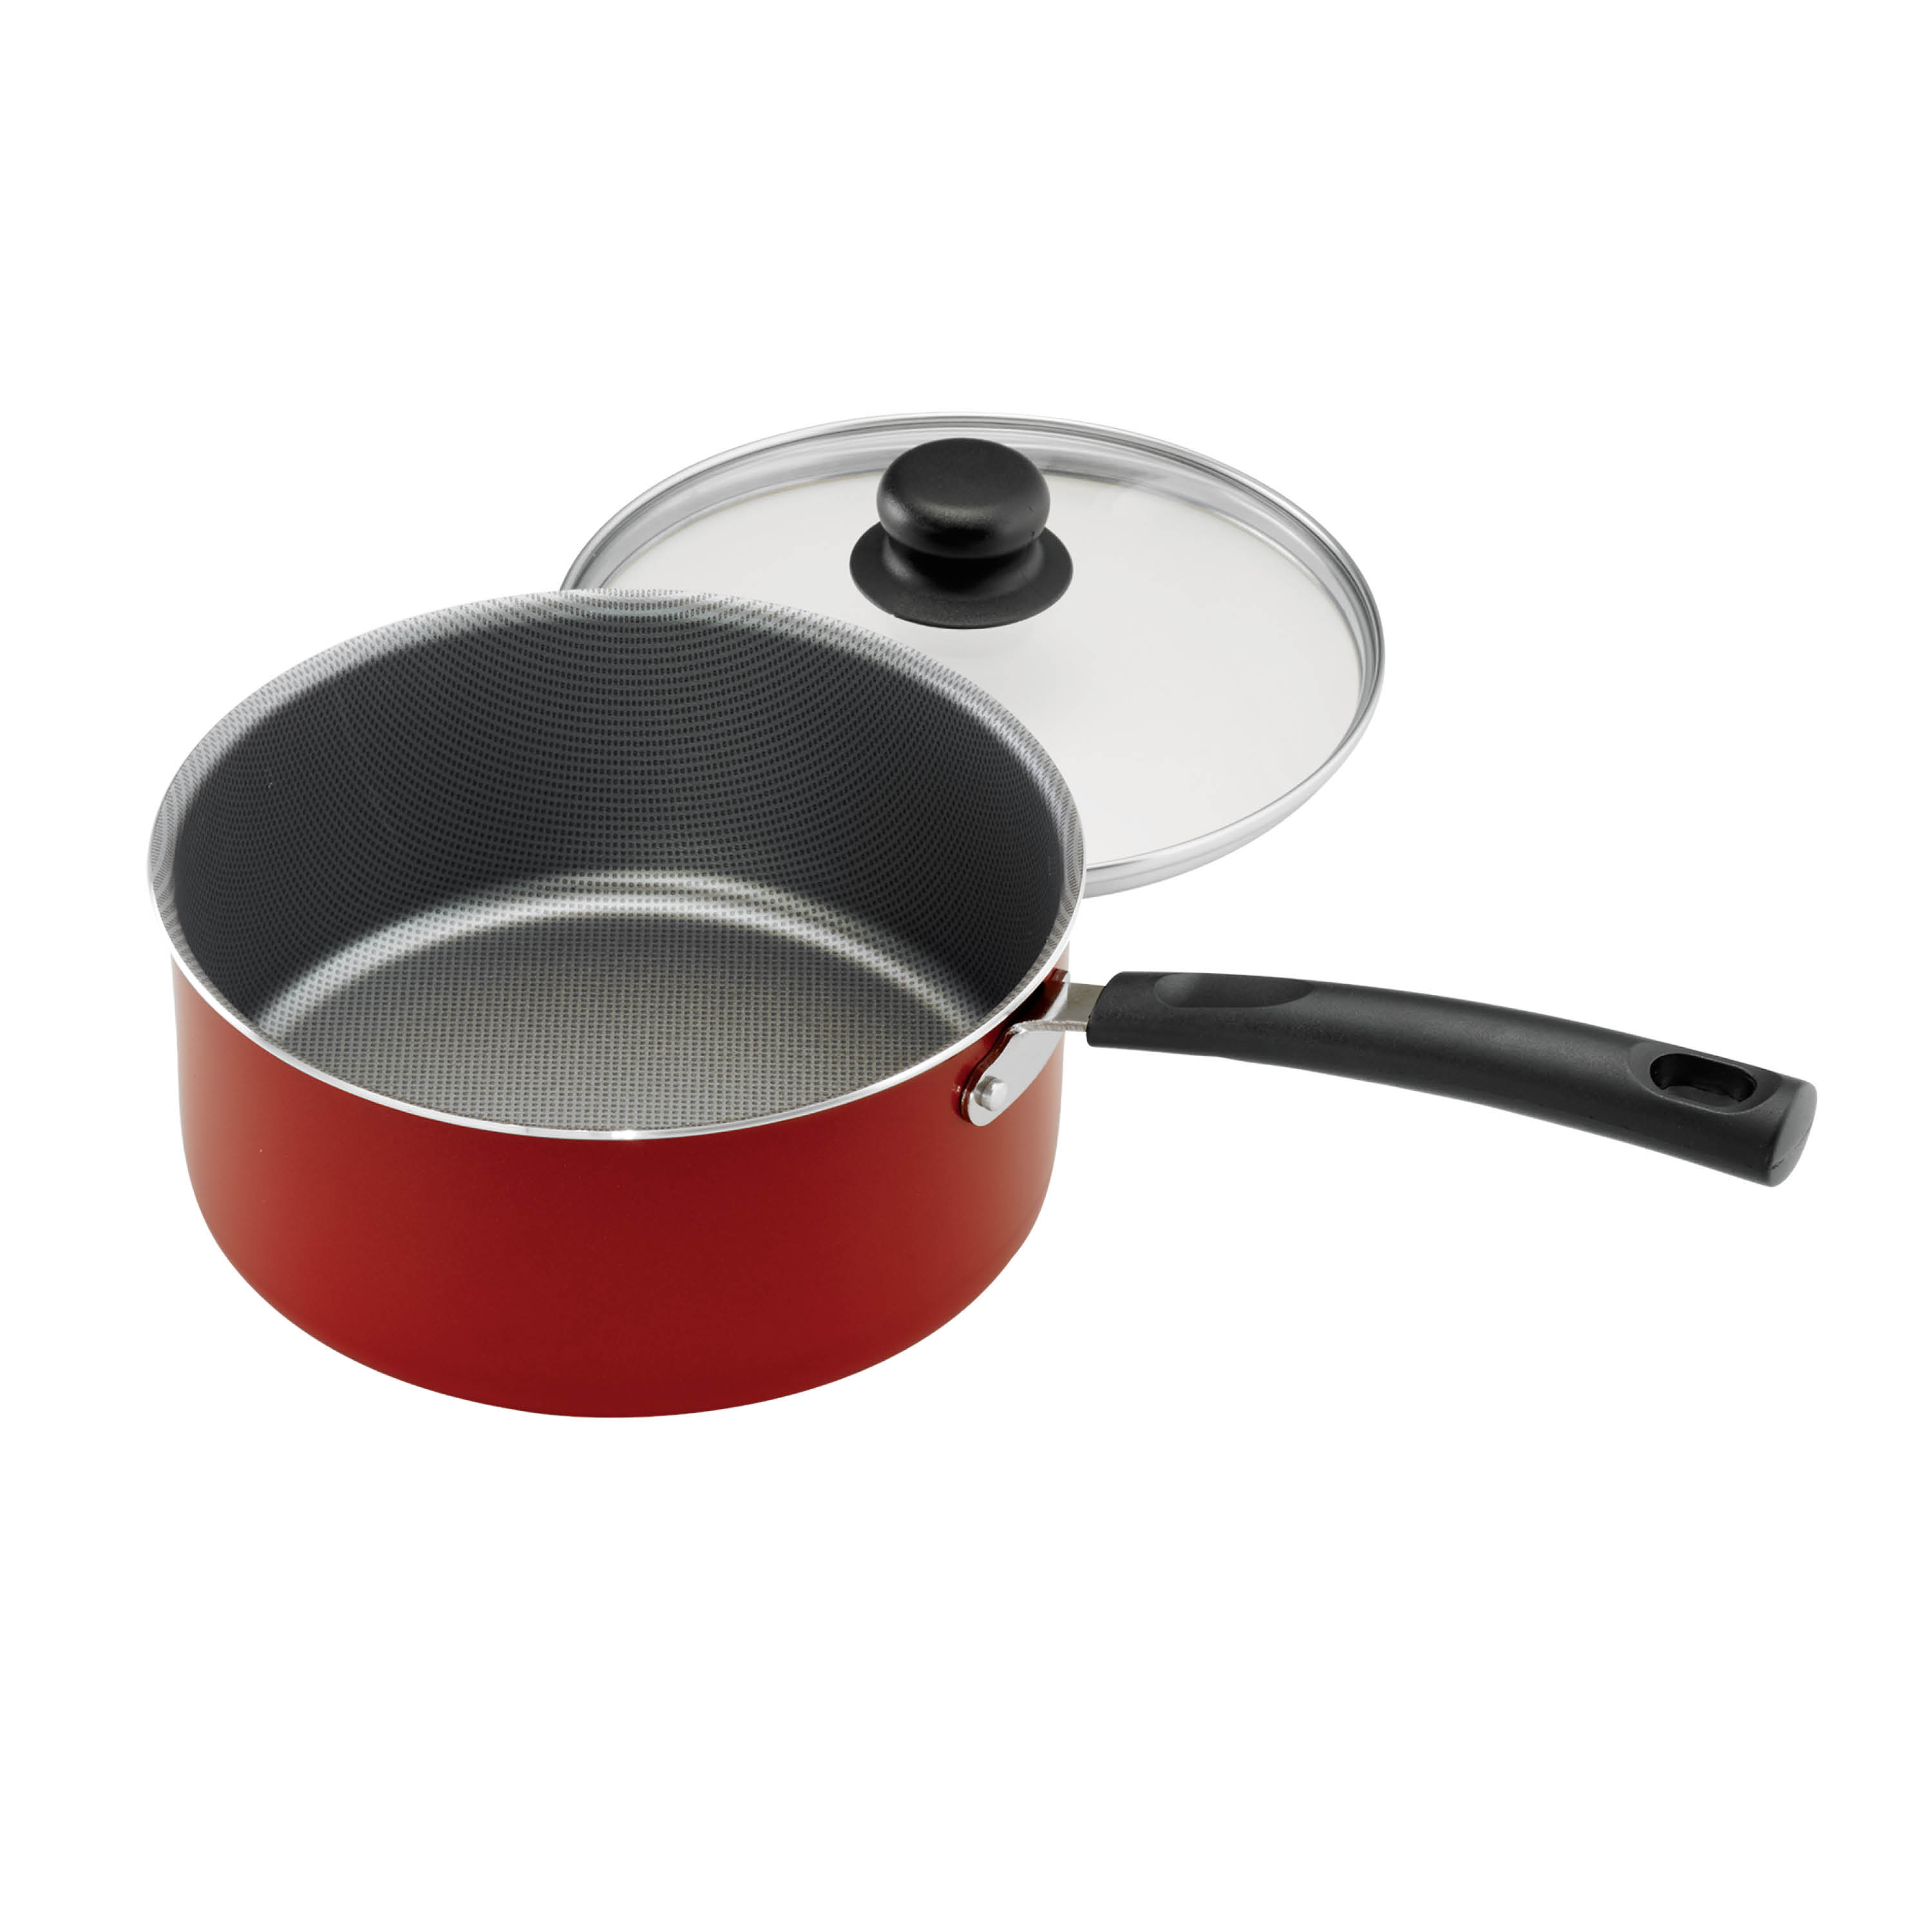 Tramontina Primaware 18 Piece Non-stick Cookware Set, Red - image 23 of 26